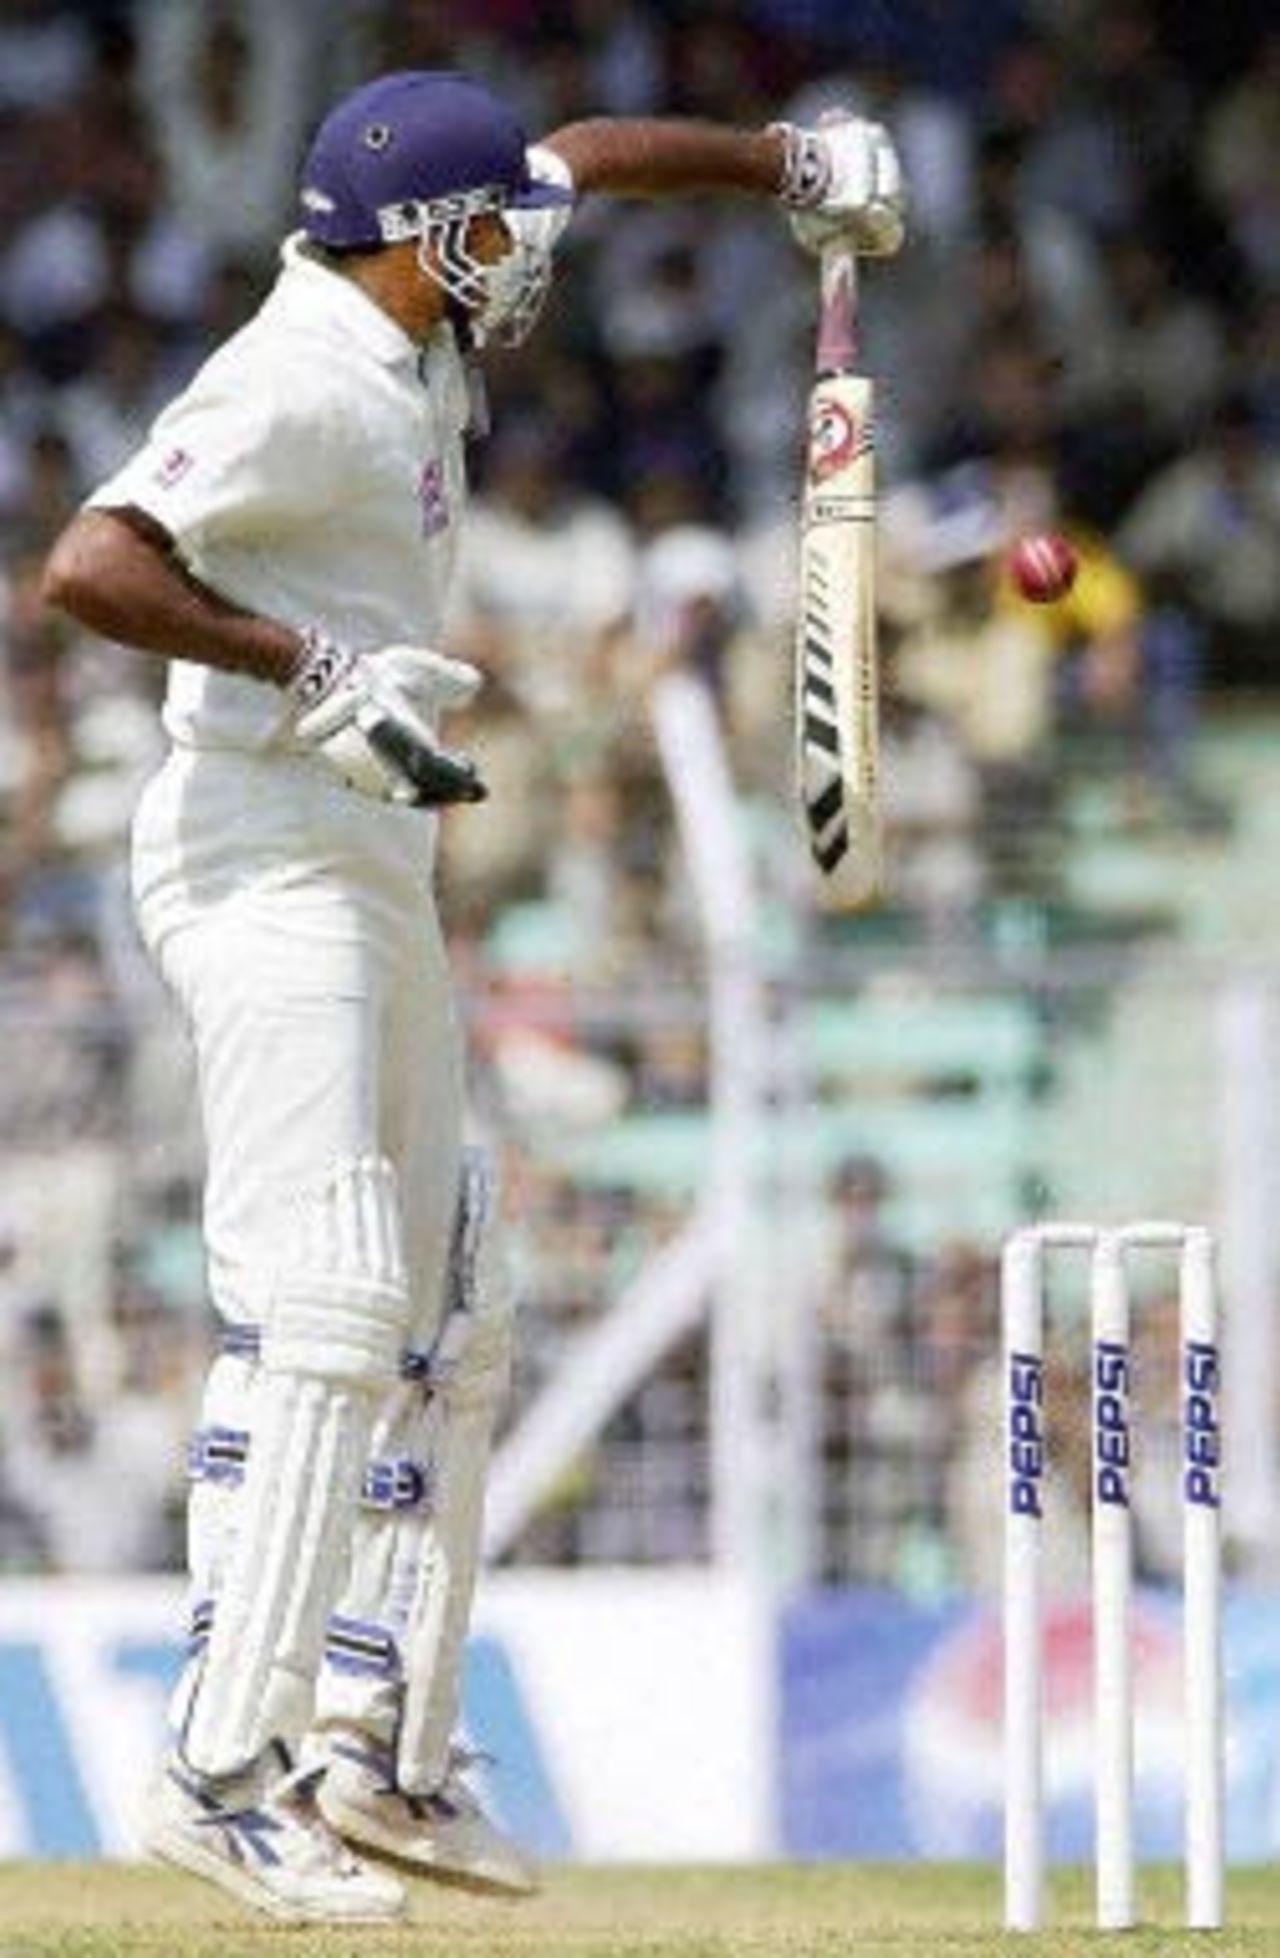 India tailender Javagal Srinath plays a delivery from Australian pace bowler Glenn McGarth with one hand during the third day's play of the first Test match between India and Australia at the Wankhede stadium in Bombay 01 March 2001. India collapsed at 219 in their second innings and face an almost certain defeat.